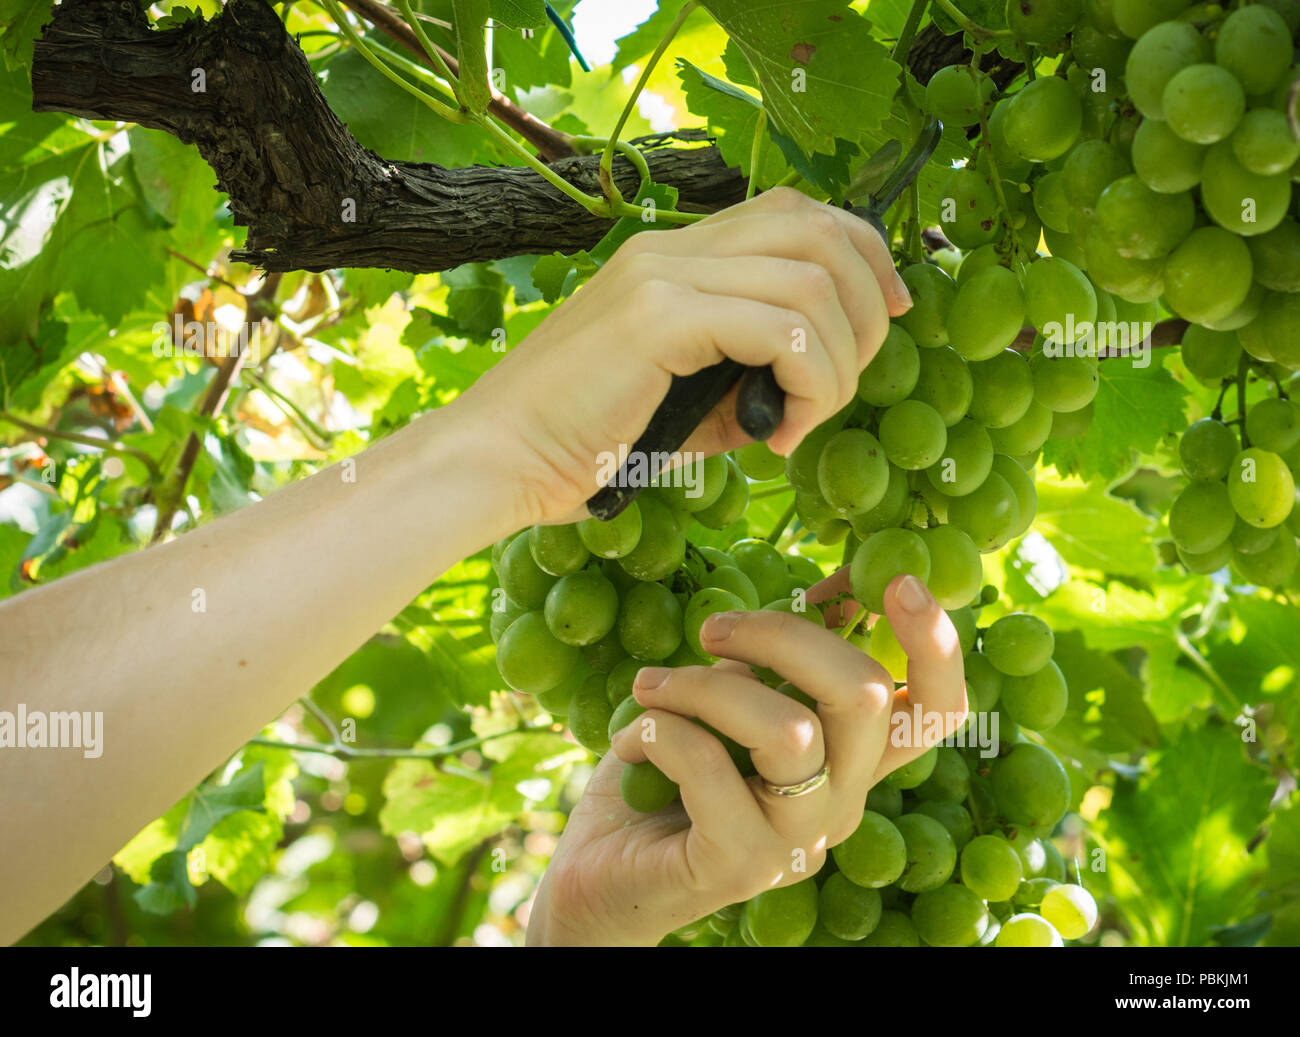 Worker's Hands Cutting White Grapes from vines during wine harvest in September. Grapes harvest in italian vineyard, South Tyrol, italy Stock Photo